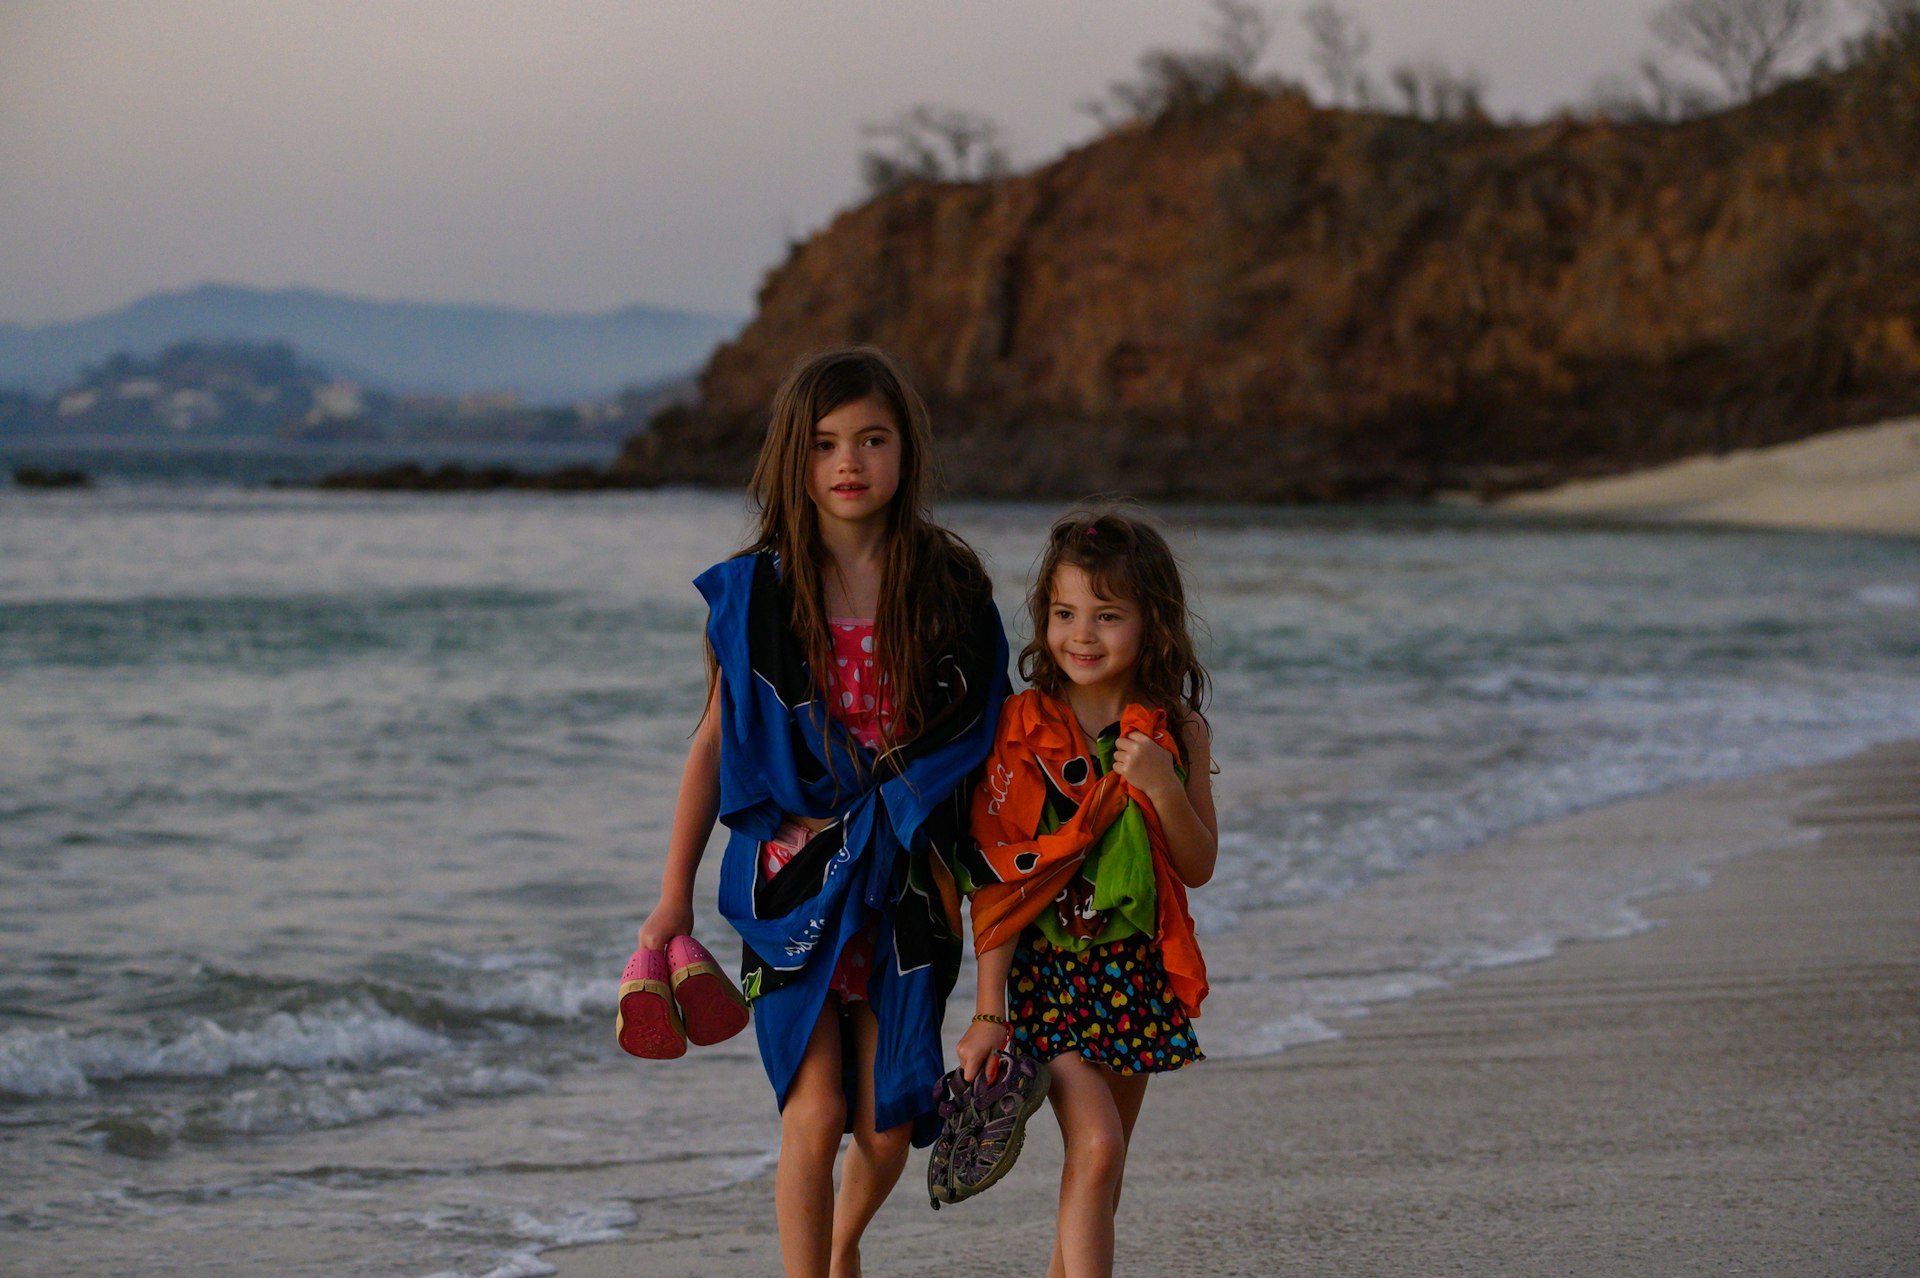 Two young girls walking alongside each other on a beach in Central America